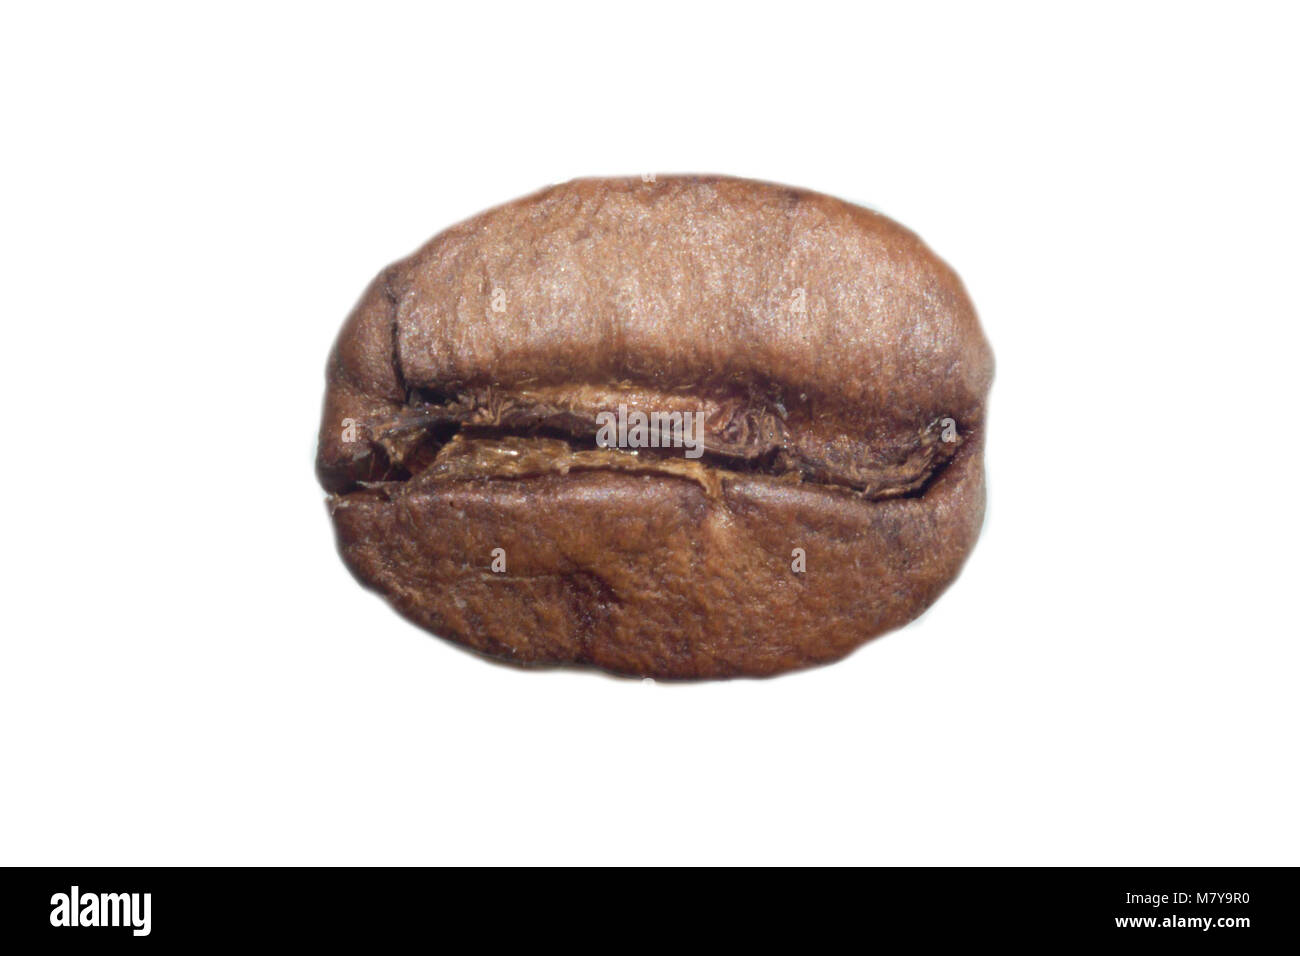 Macro photo of roasted coffee bean. Furrow in the middle. On a white background. Photo for the site about food, drinks, health, business. Stock Photo